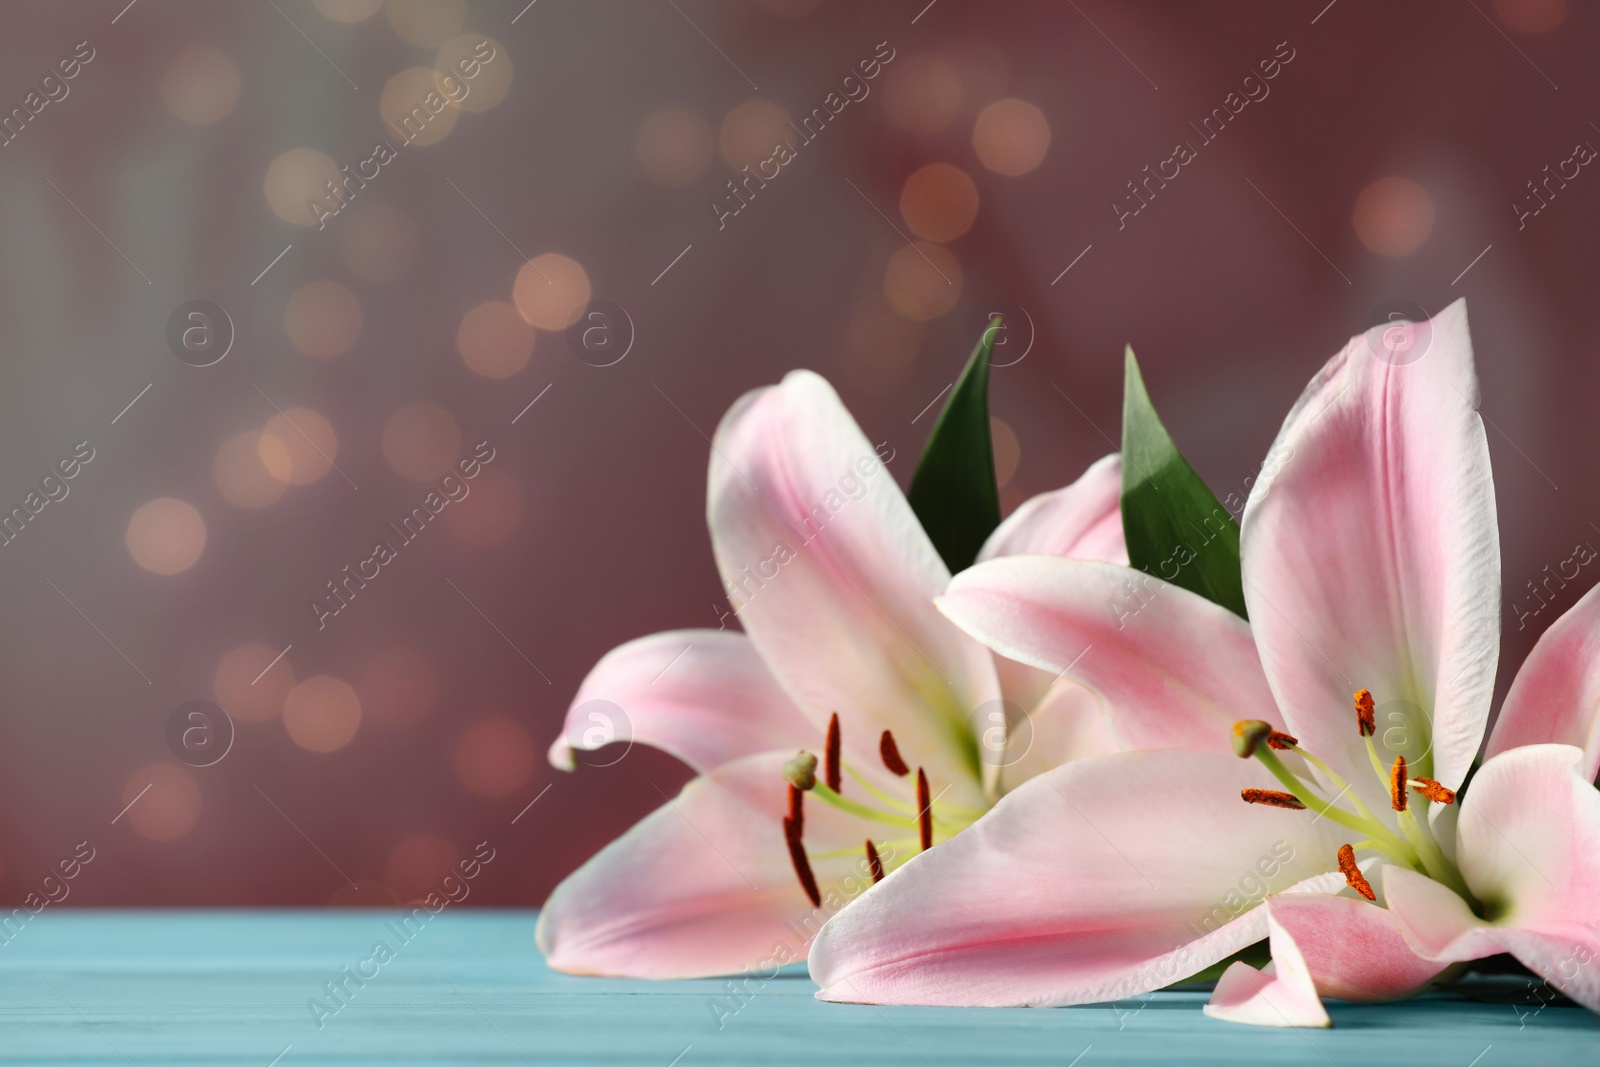 Photo of Beautiful pink lily flowers on turquoise table against blurred lights, space for text